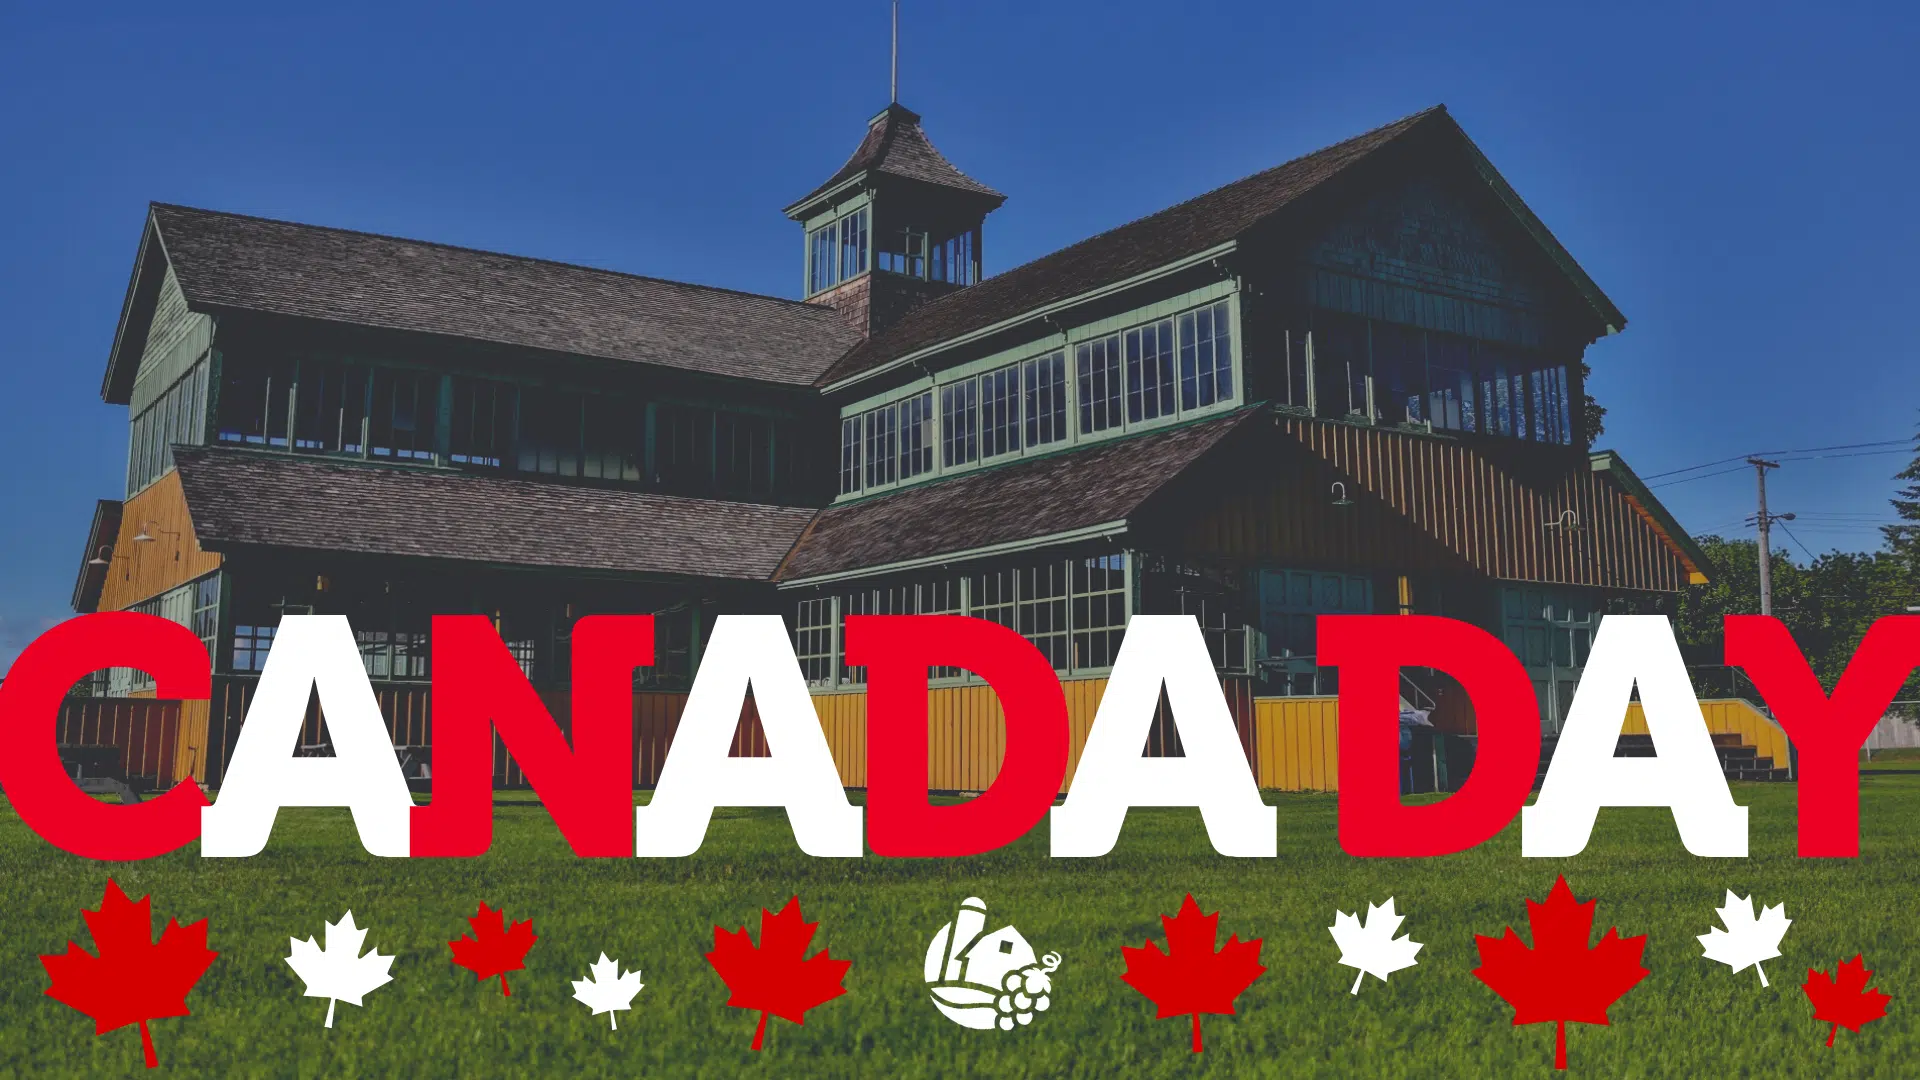 Canada Day events across Prince Edward County